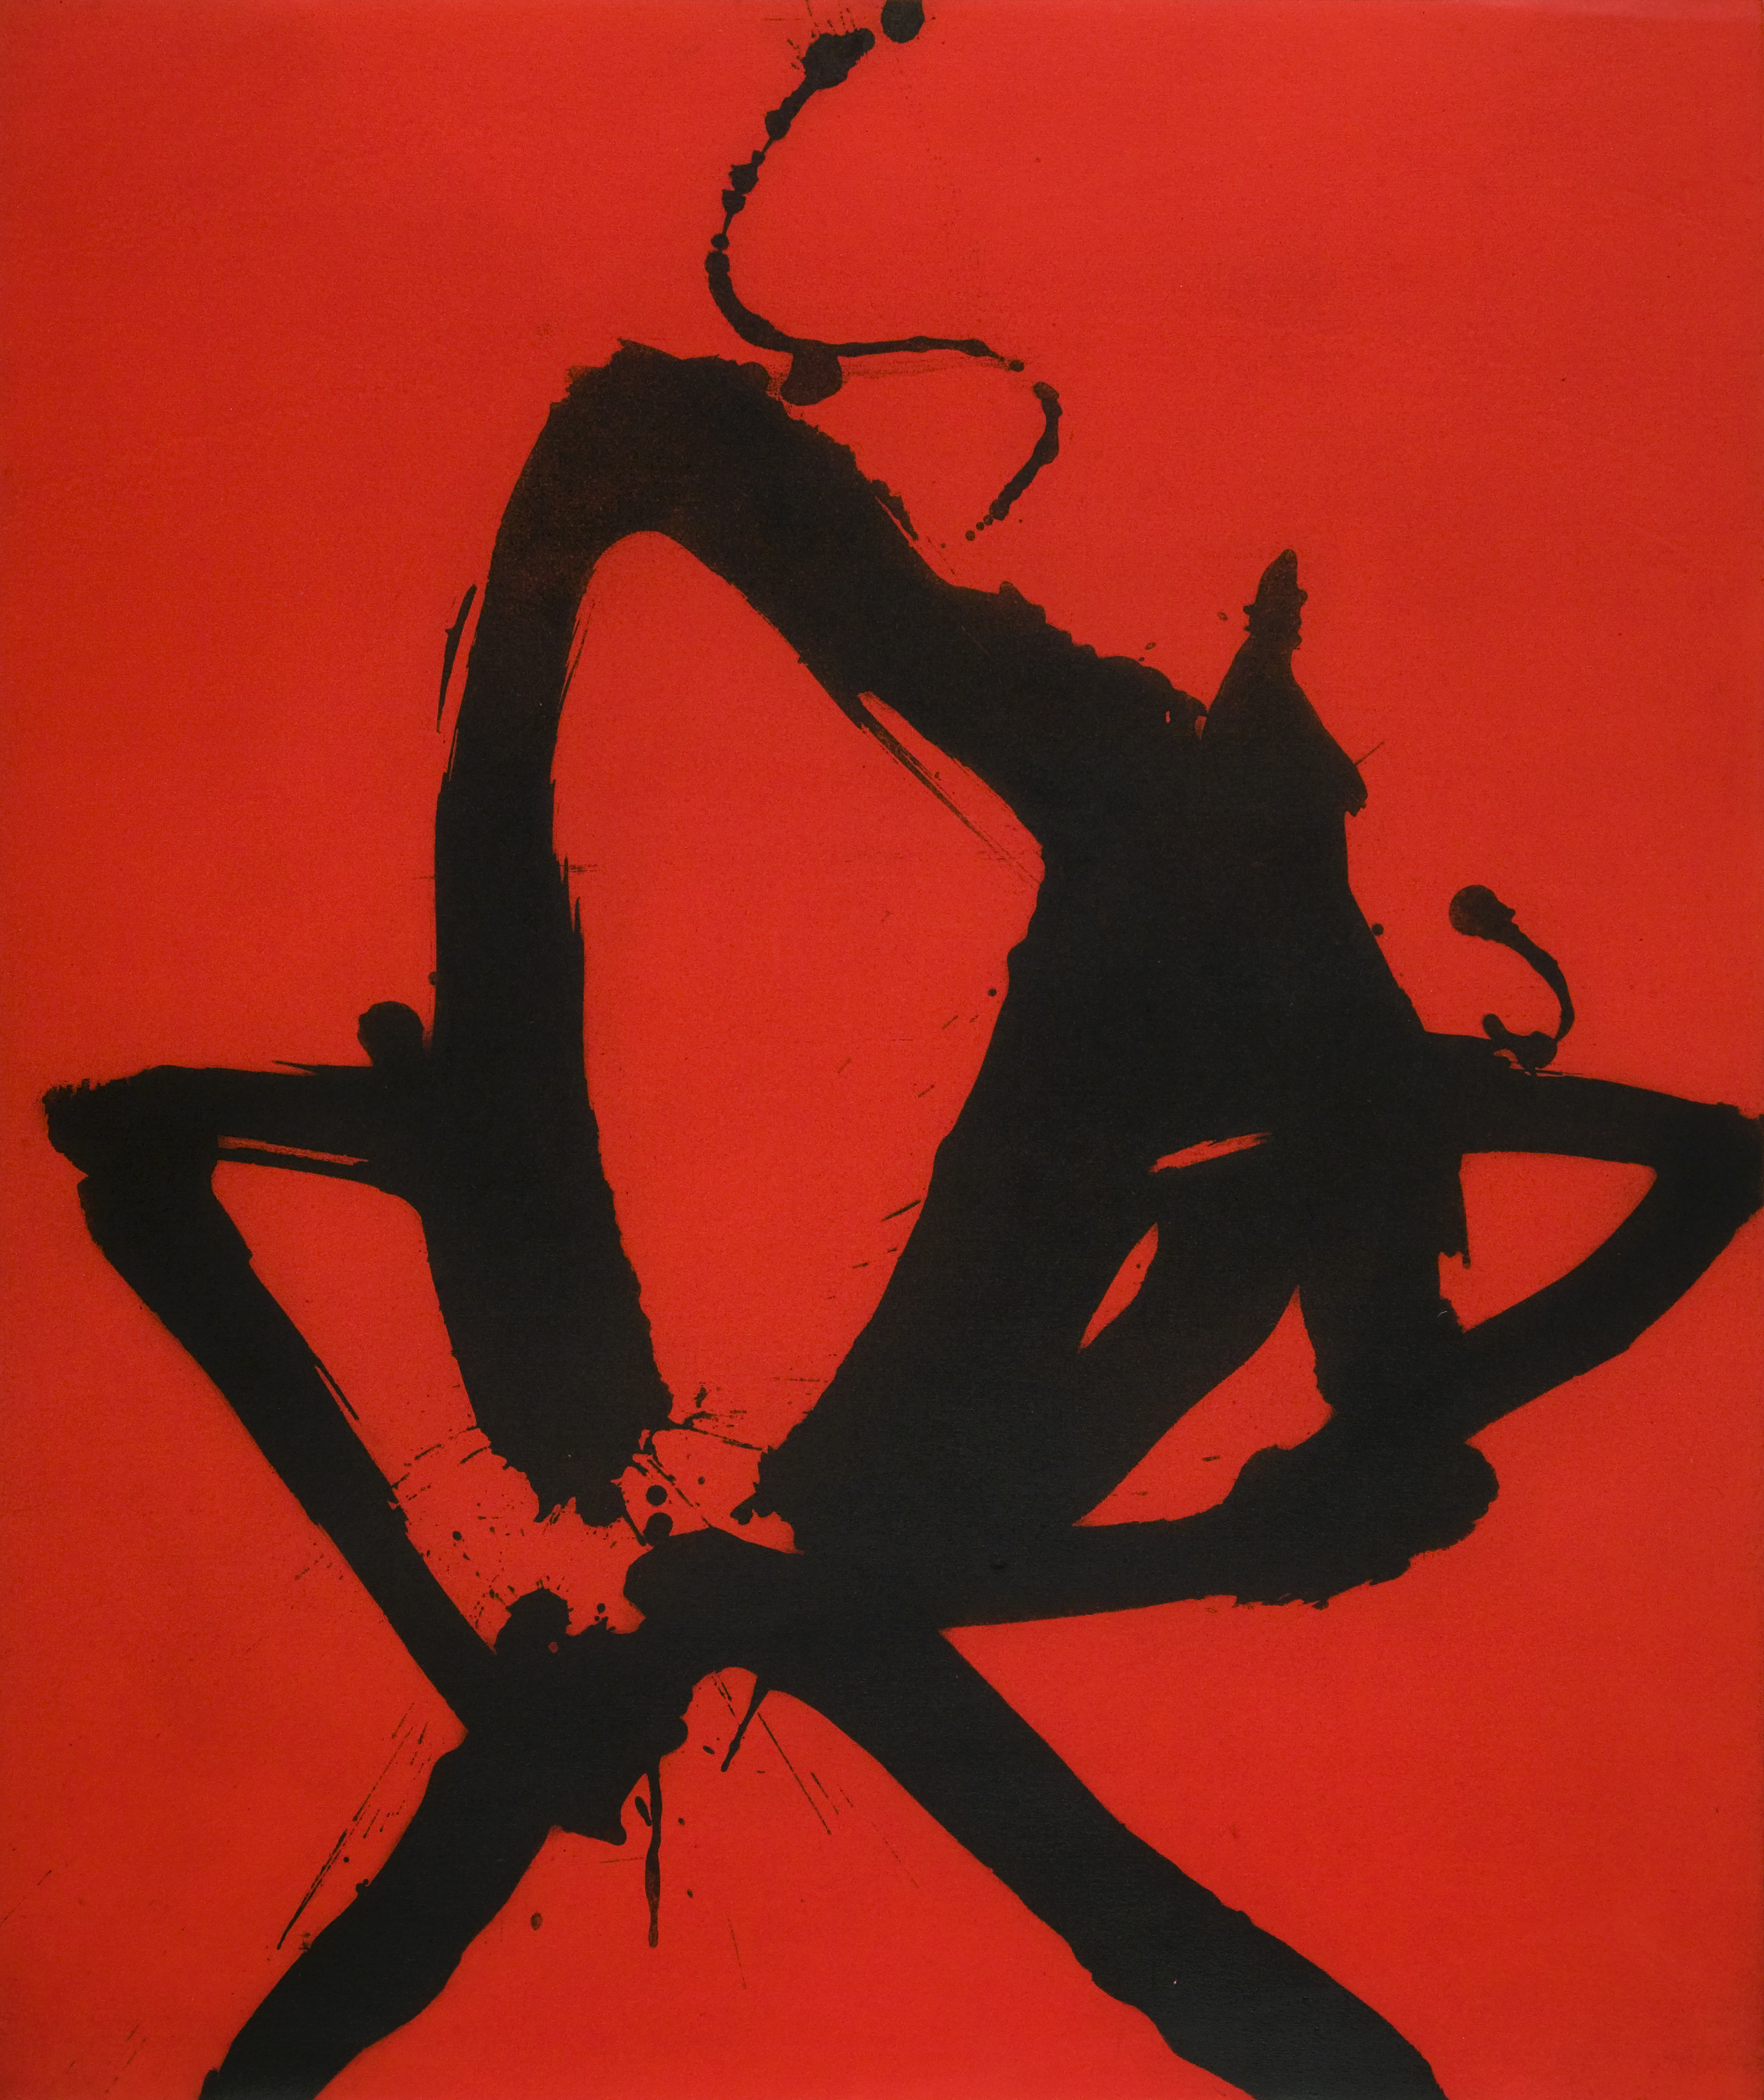 Robert Motherwell, (American, 1915-1991), ‘Red Sea I,’ 1976. Aquatint and etching. Lent by Susan and David Goode. © 2022 Dedalus Foundation, Inc. / Artists Rights Society (ARS), NY